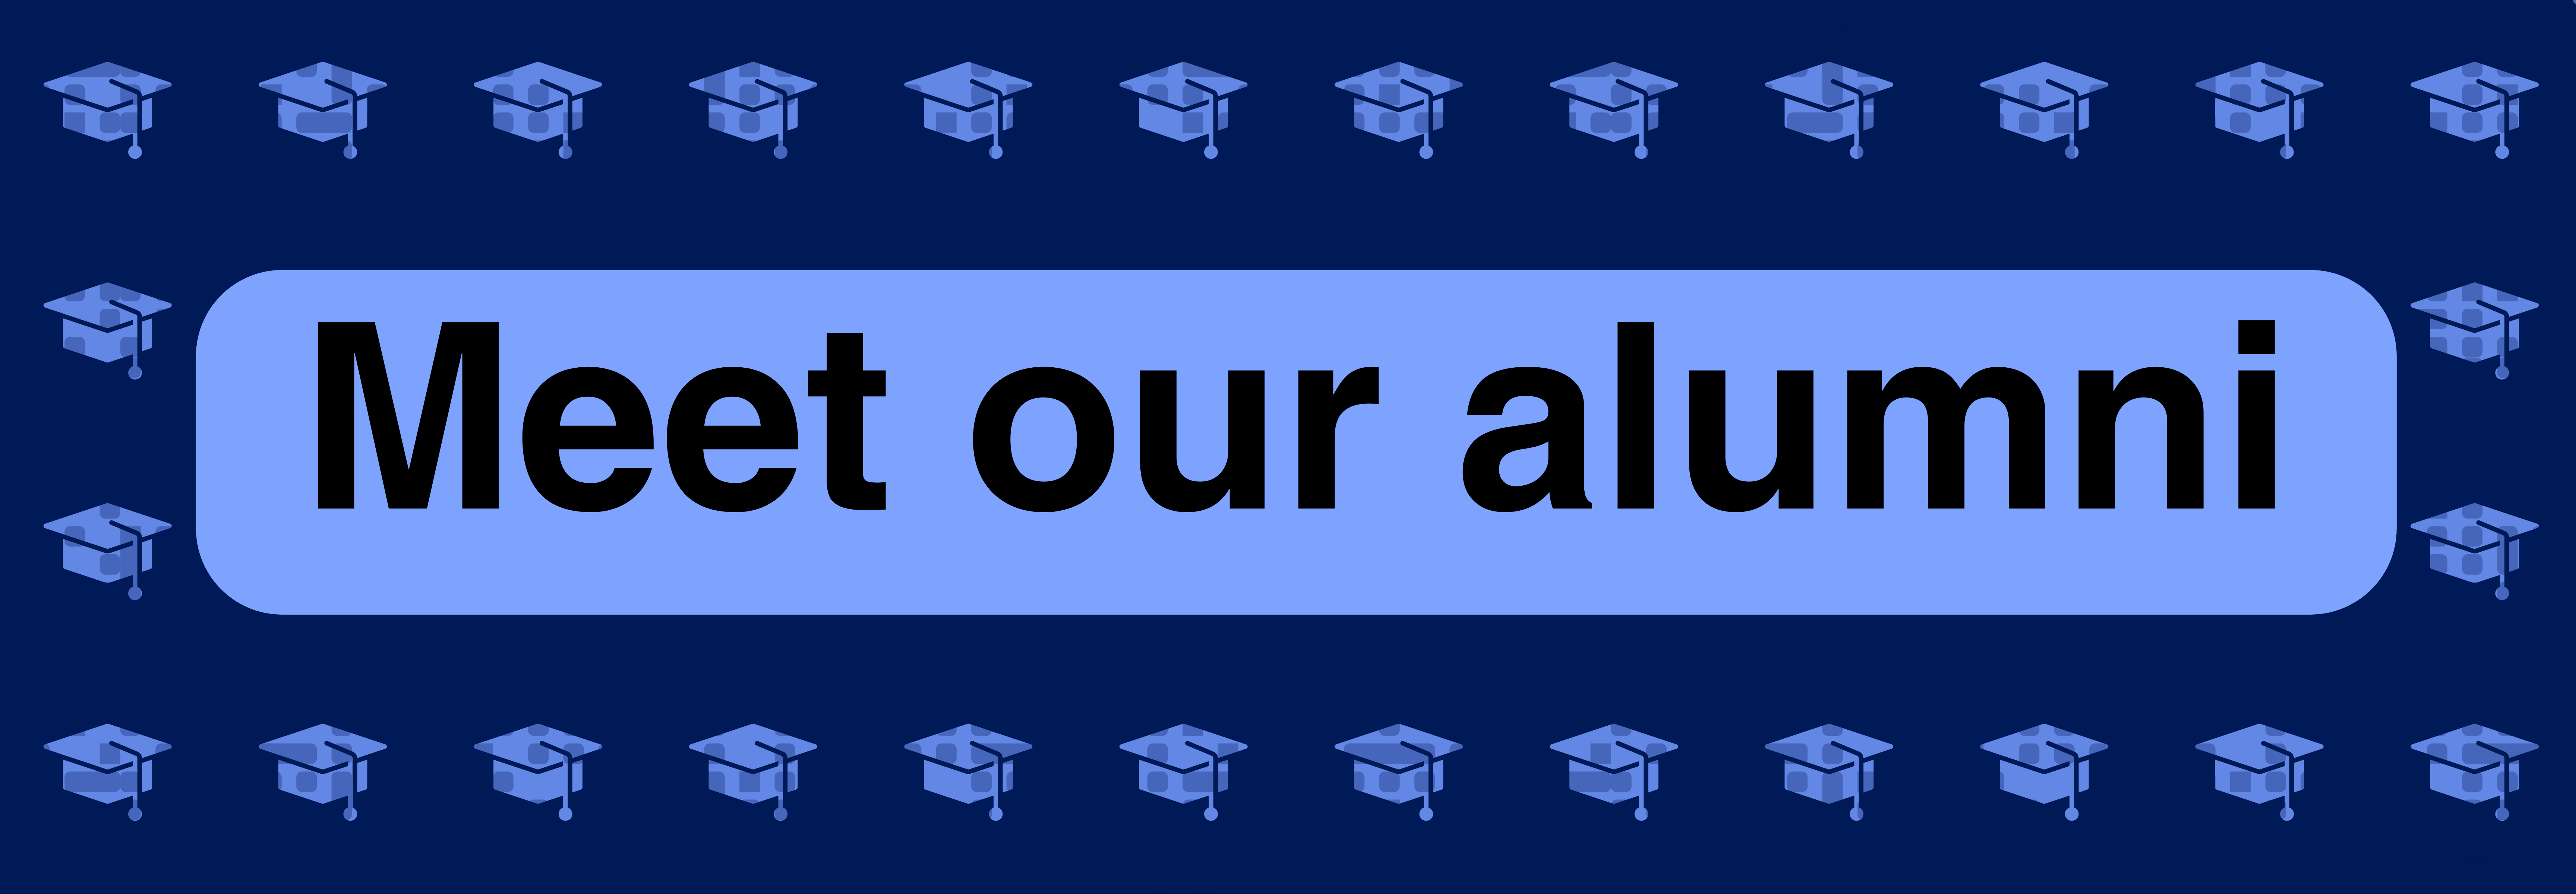 A dark blue graphic banner with a repeated pattern of mortarboard caps around a paler blue text box with text reading 'Meet our alumni'.